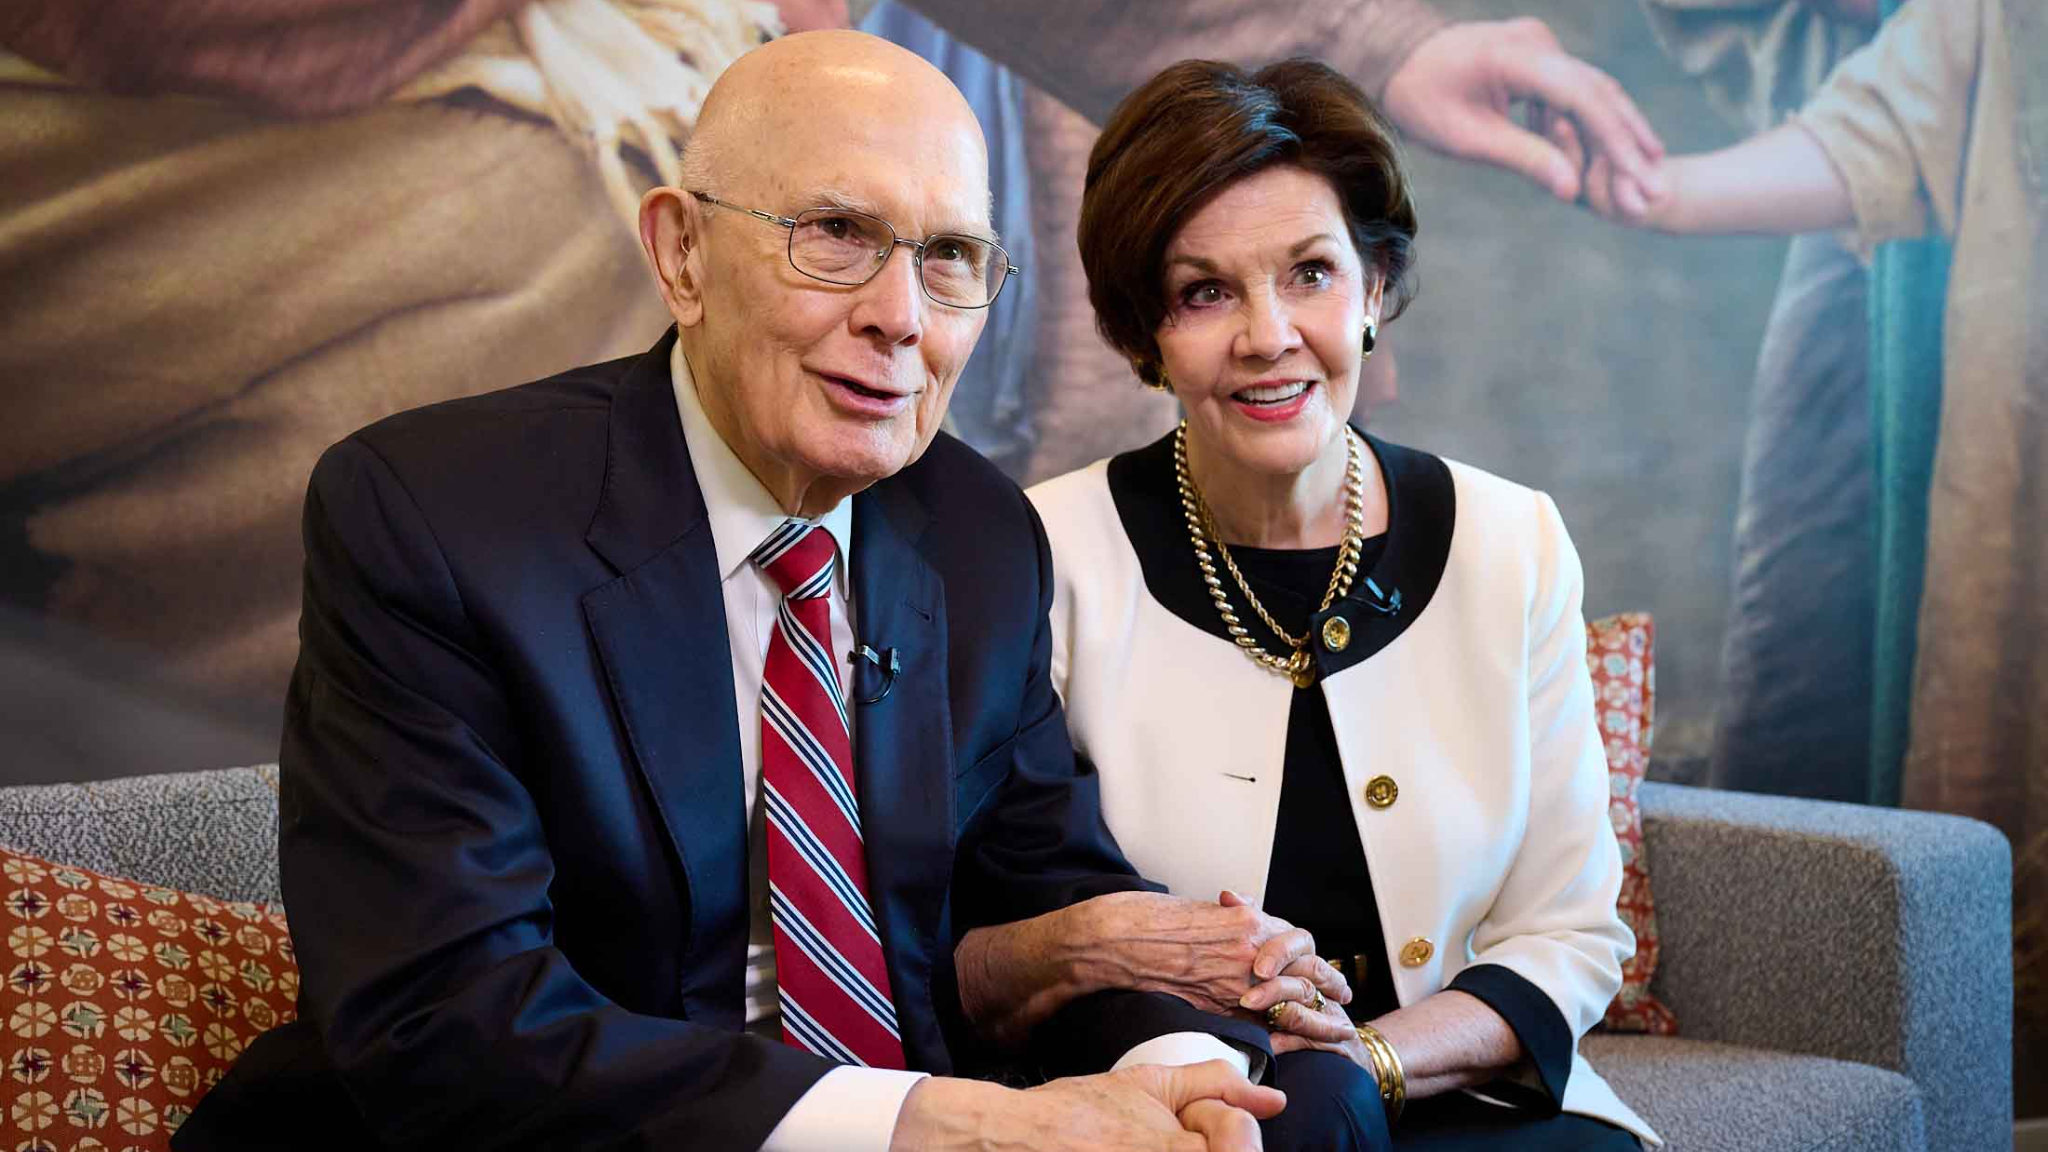 President Dallin H. Oaks, first counselor in the First Presidency, pictured here with his wife Kris...